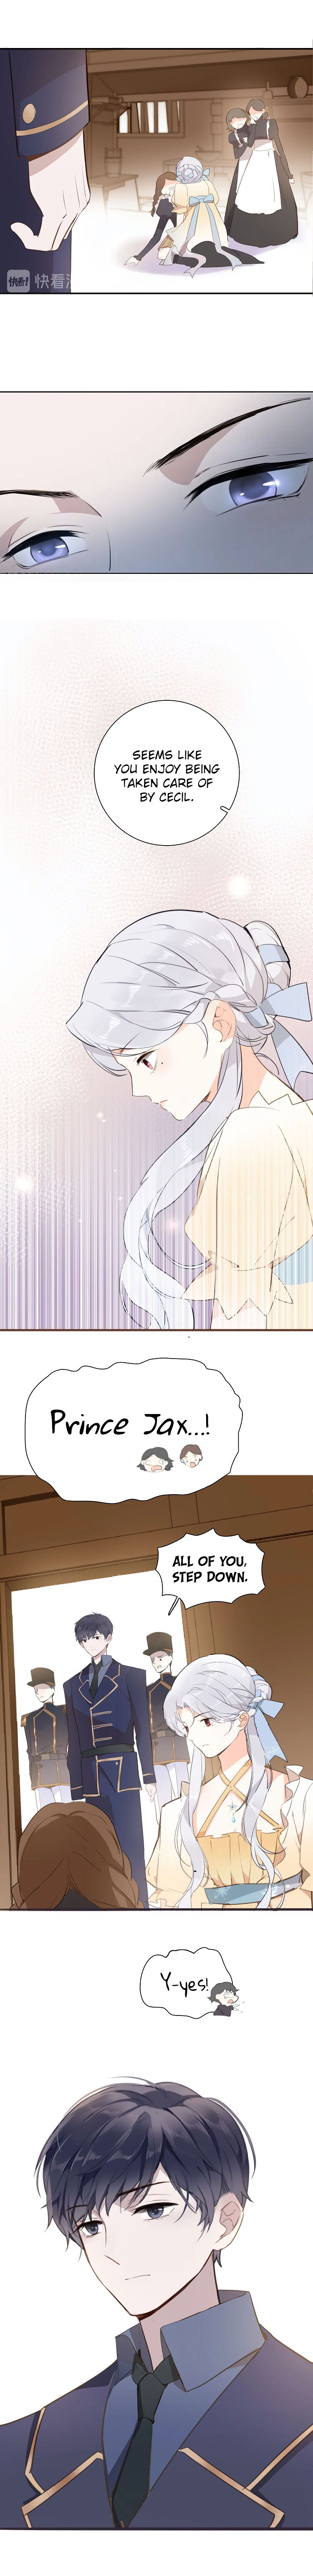 The Making of a Princess Ch. 13 Congratulations!